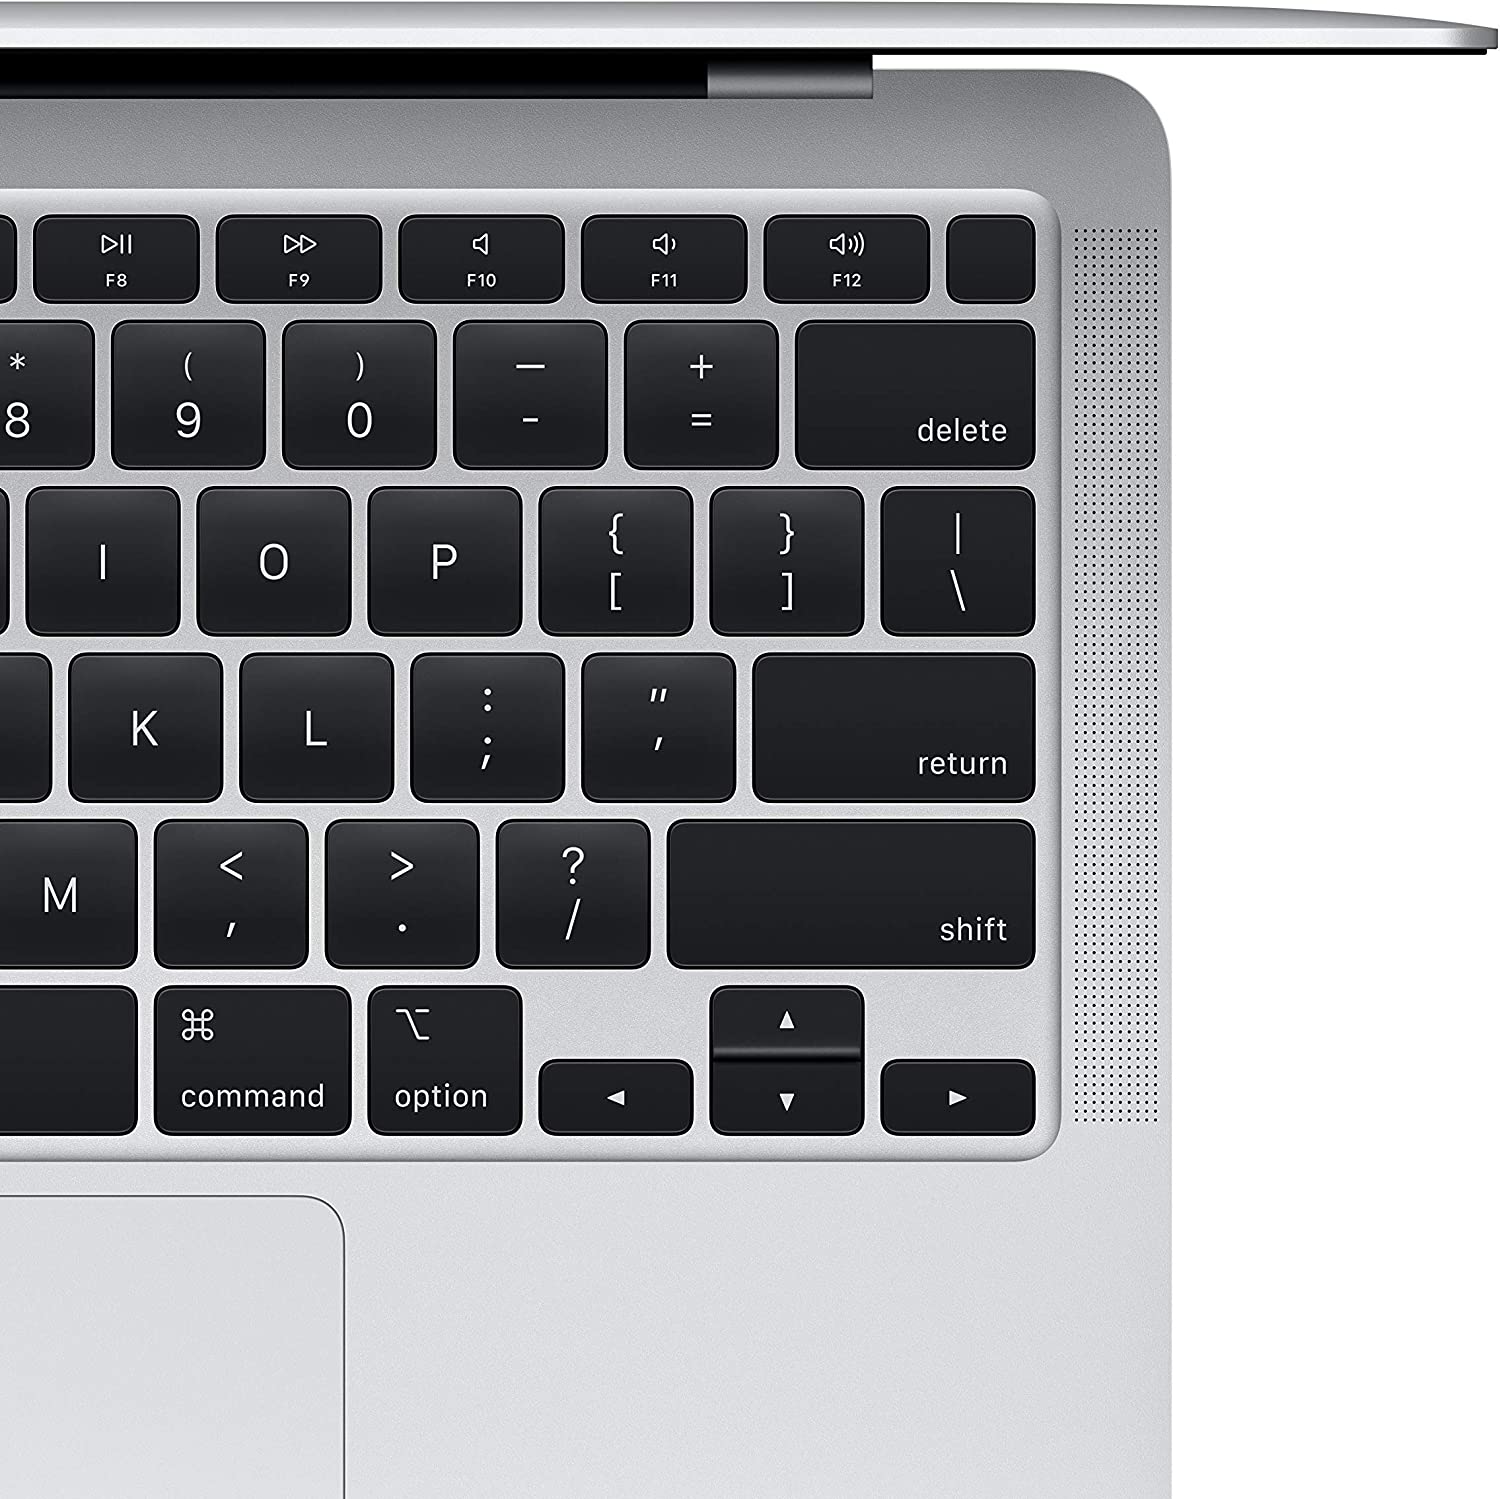 The new MacBook Air wowed me with its extended battery life and rapid performance, but it lacks key functions